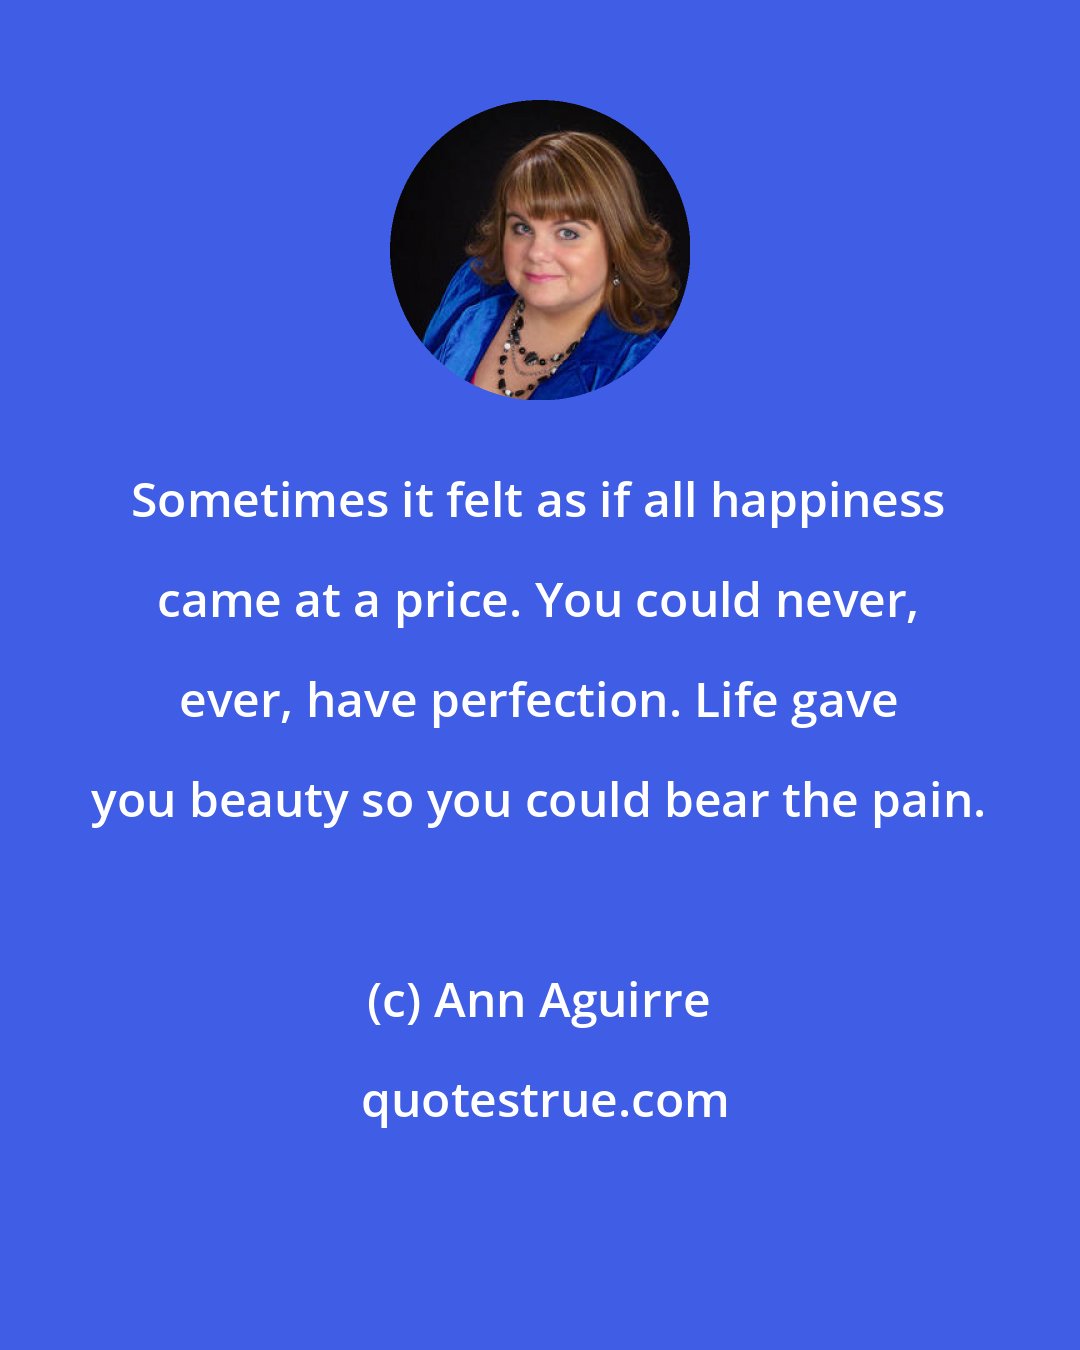 Ann Aguirre: Sometimes it felt as if all happiness came at a price. You could never, ever, have perfection. Life gave you beauty so you could bear the pain.